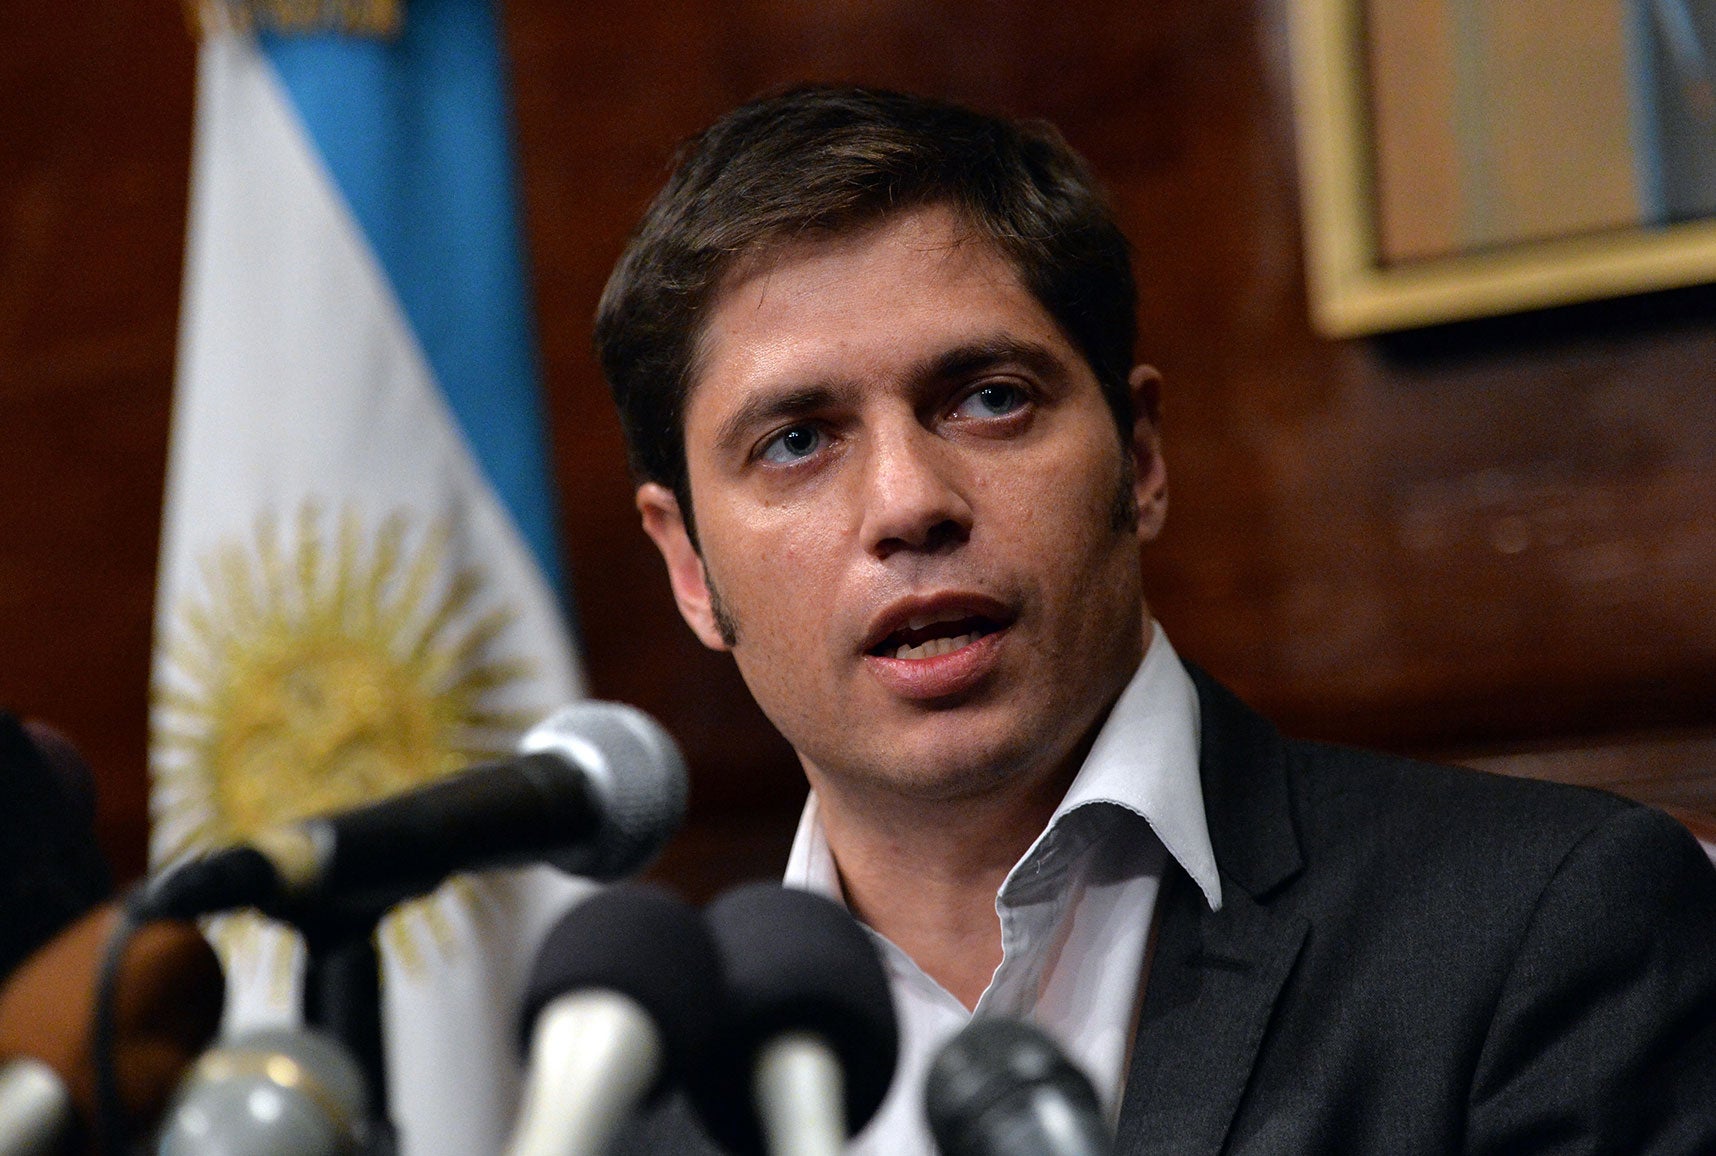 Argentina's Economy Minister Axel Kicillof speaks during a press conference at the Argentina Consulate July 30, 2014 in New York as talks into Argentina's debt failed